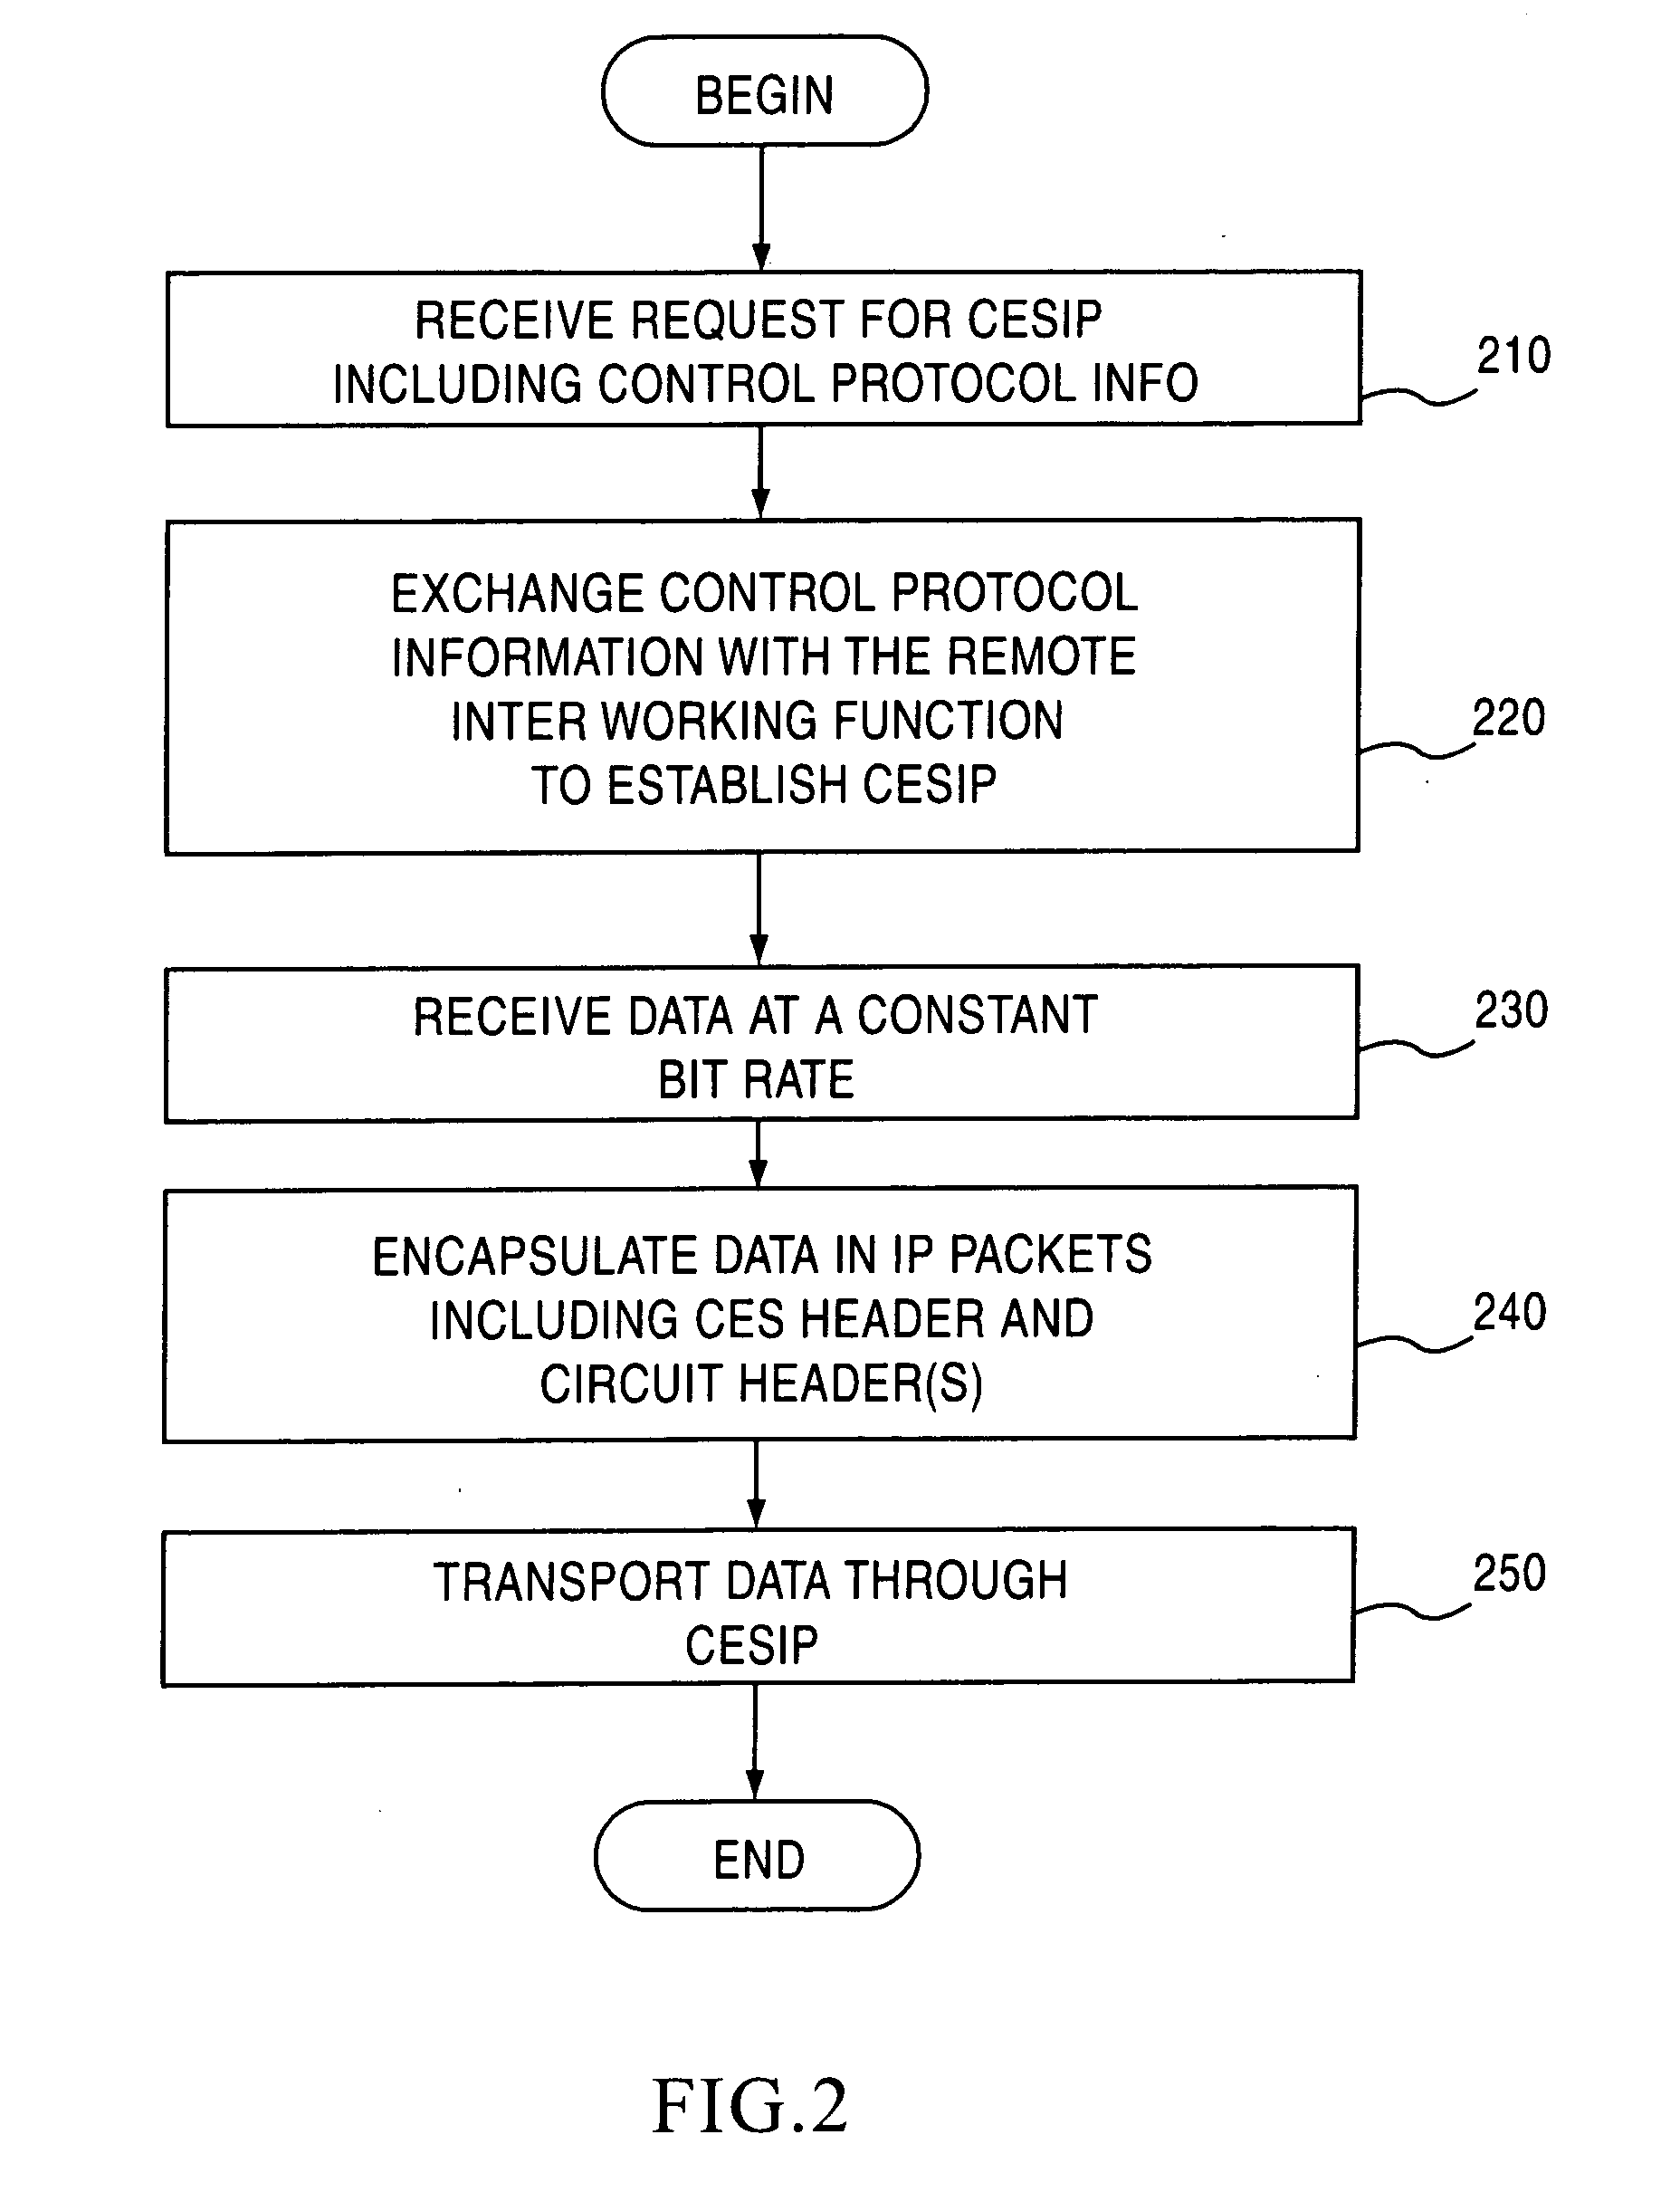 Jitter buffer for a circuit emulation service over an internal protocol network